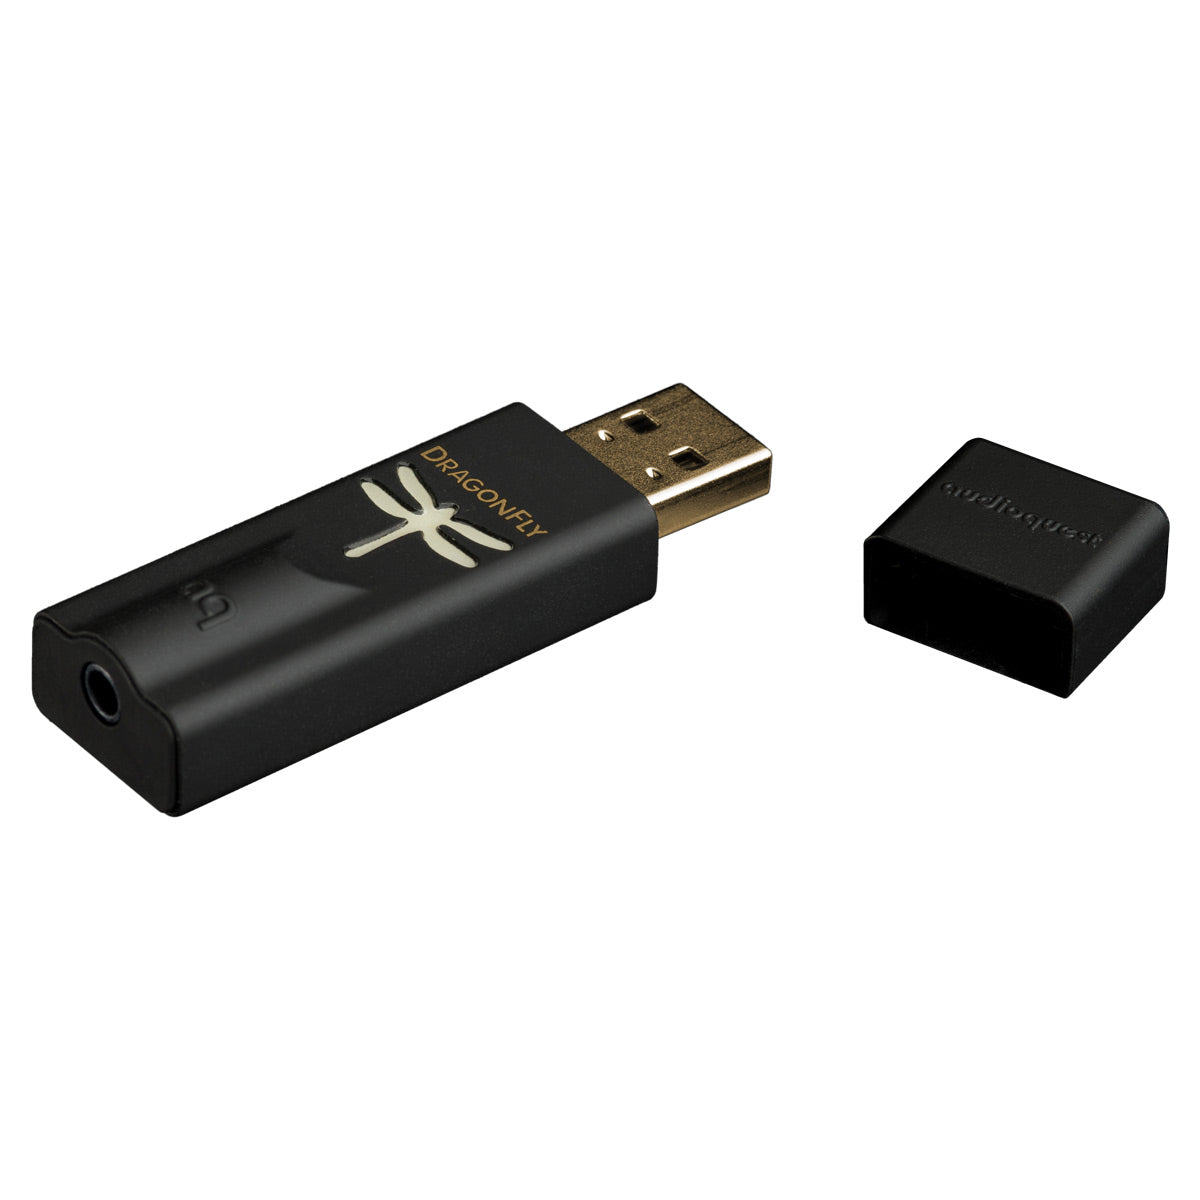 AudioQuest JitterBug FMJ USB 2.0 Power & Noise-Filter with DragonFly Black v1.5 USB Digital-to-Analog Converter